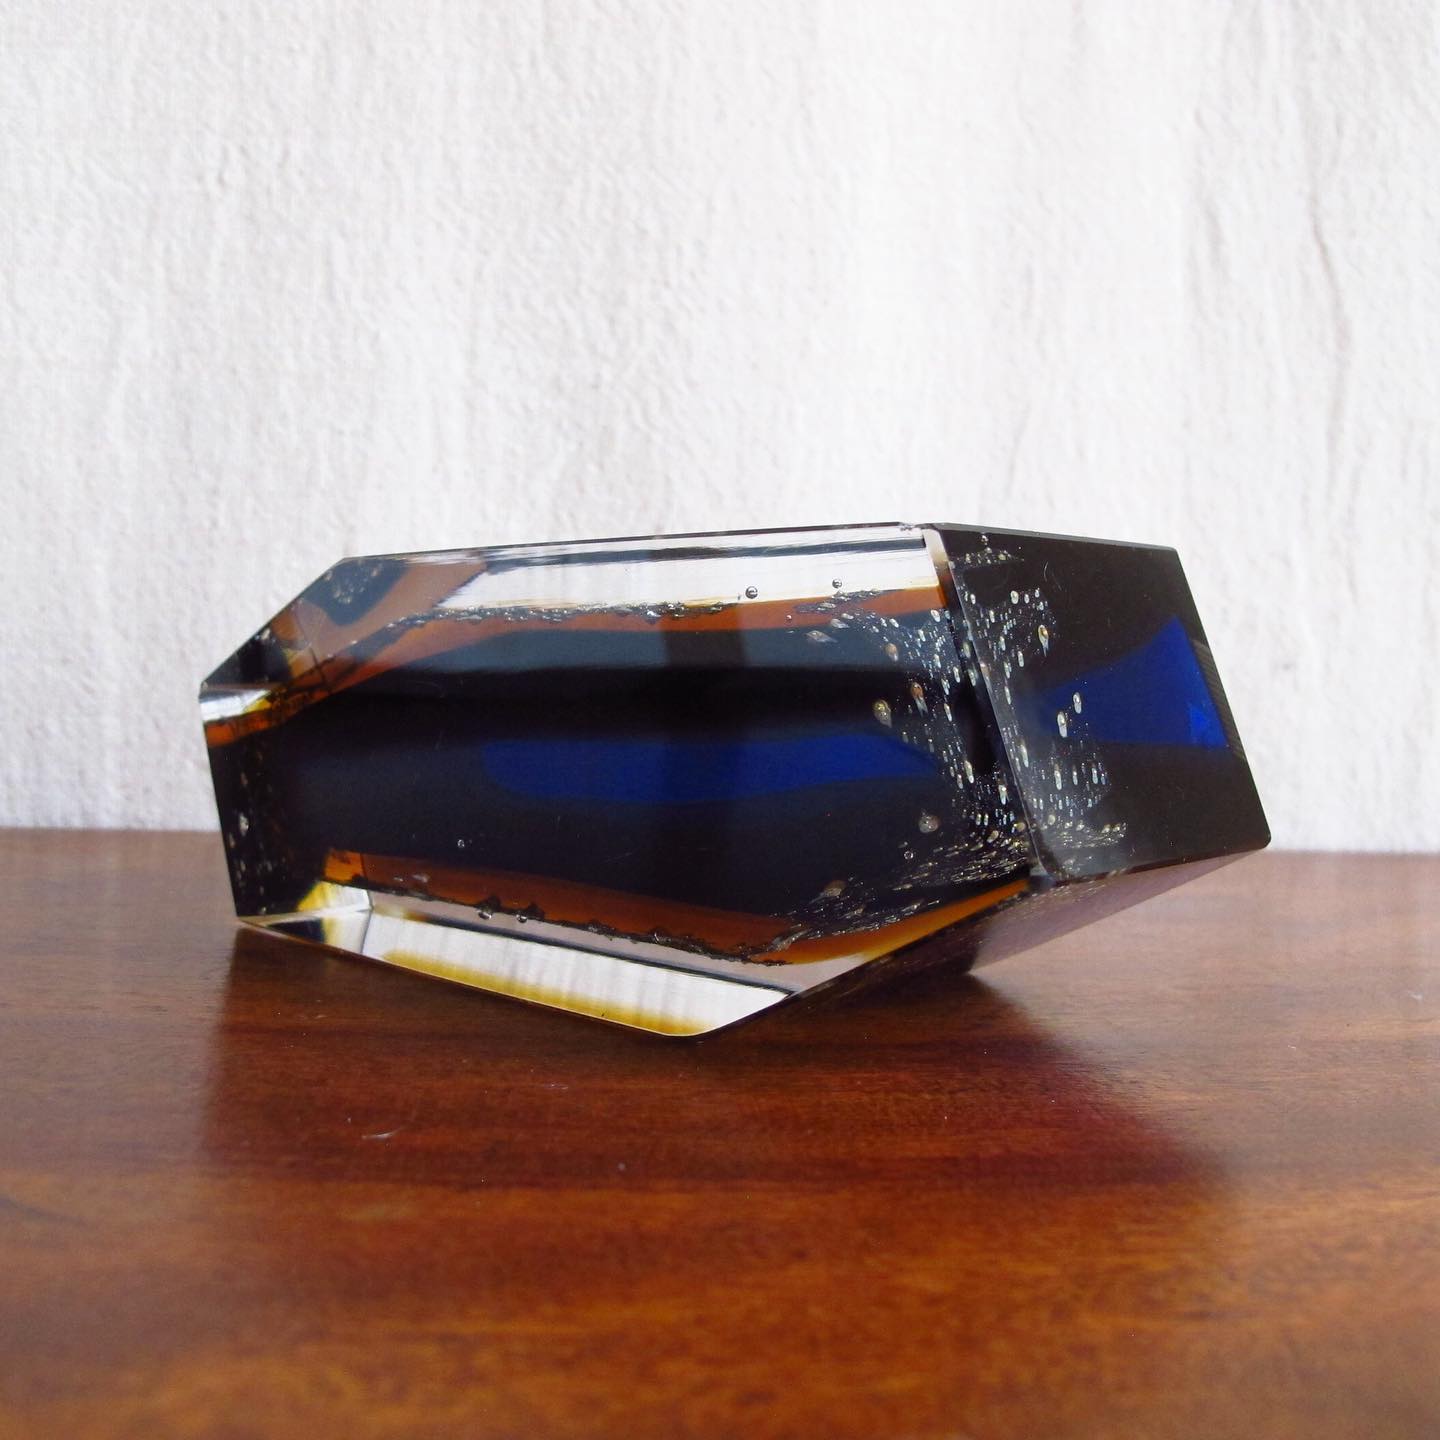 1970s Italian Art Glass Vase (or possibly bowl), Faceted Geometric with Blue and Amber and Clear Glass